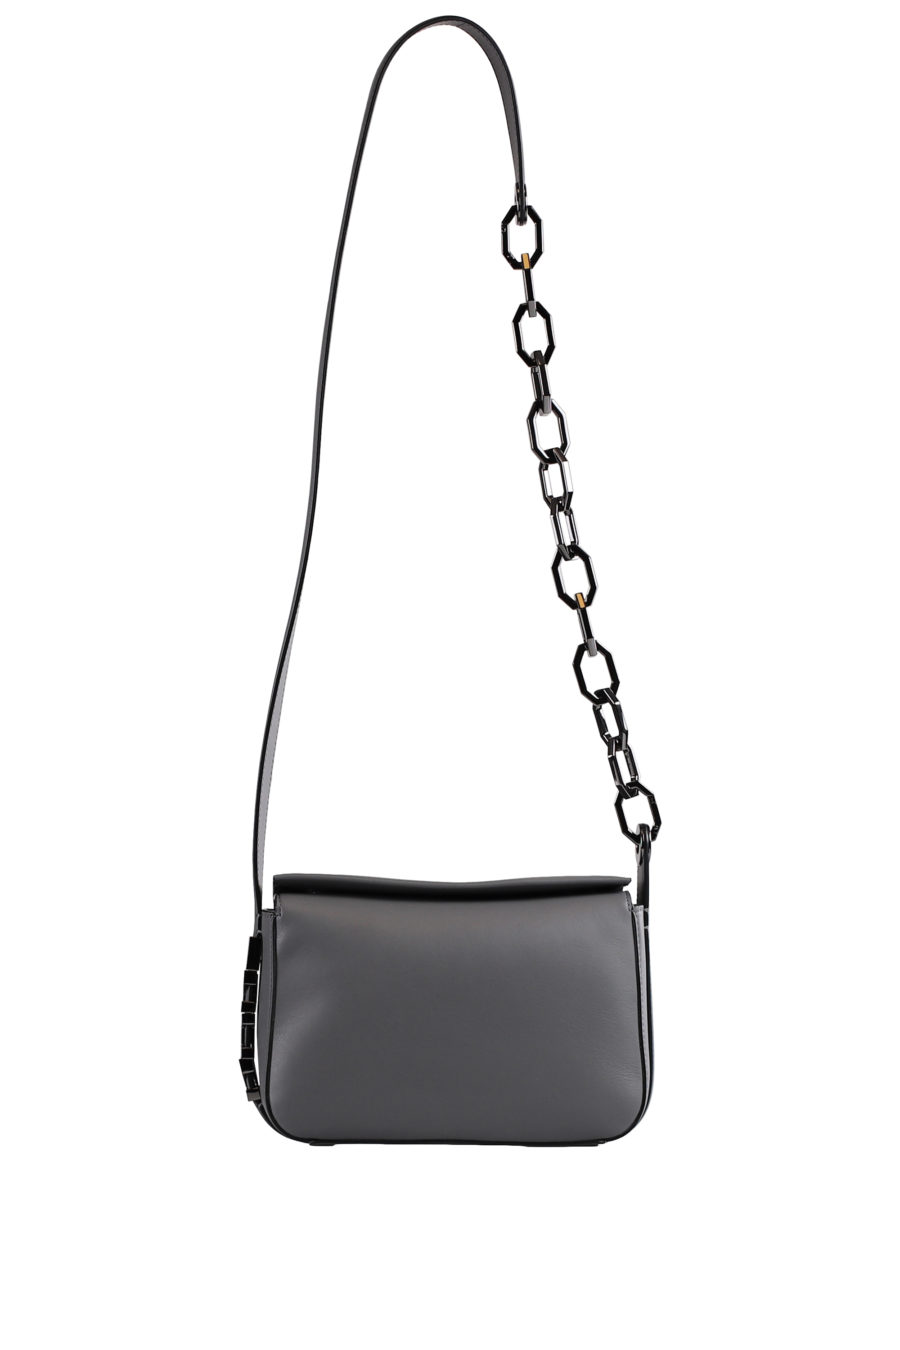 Grey shoulder bag with chain - IMG 9721